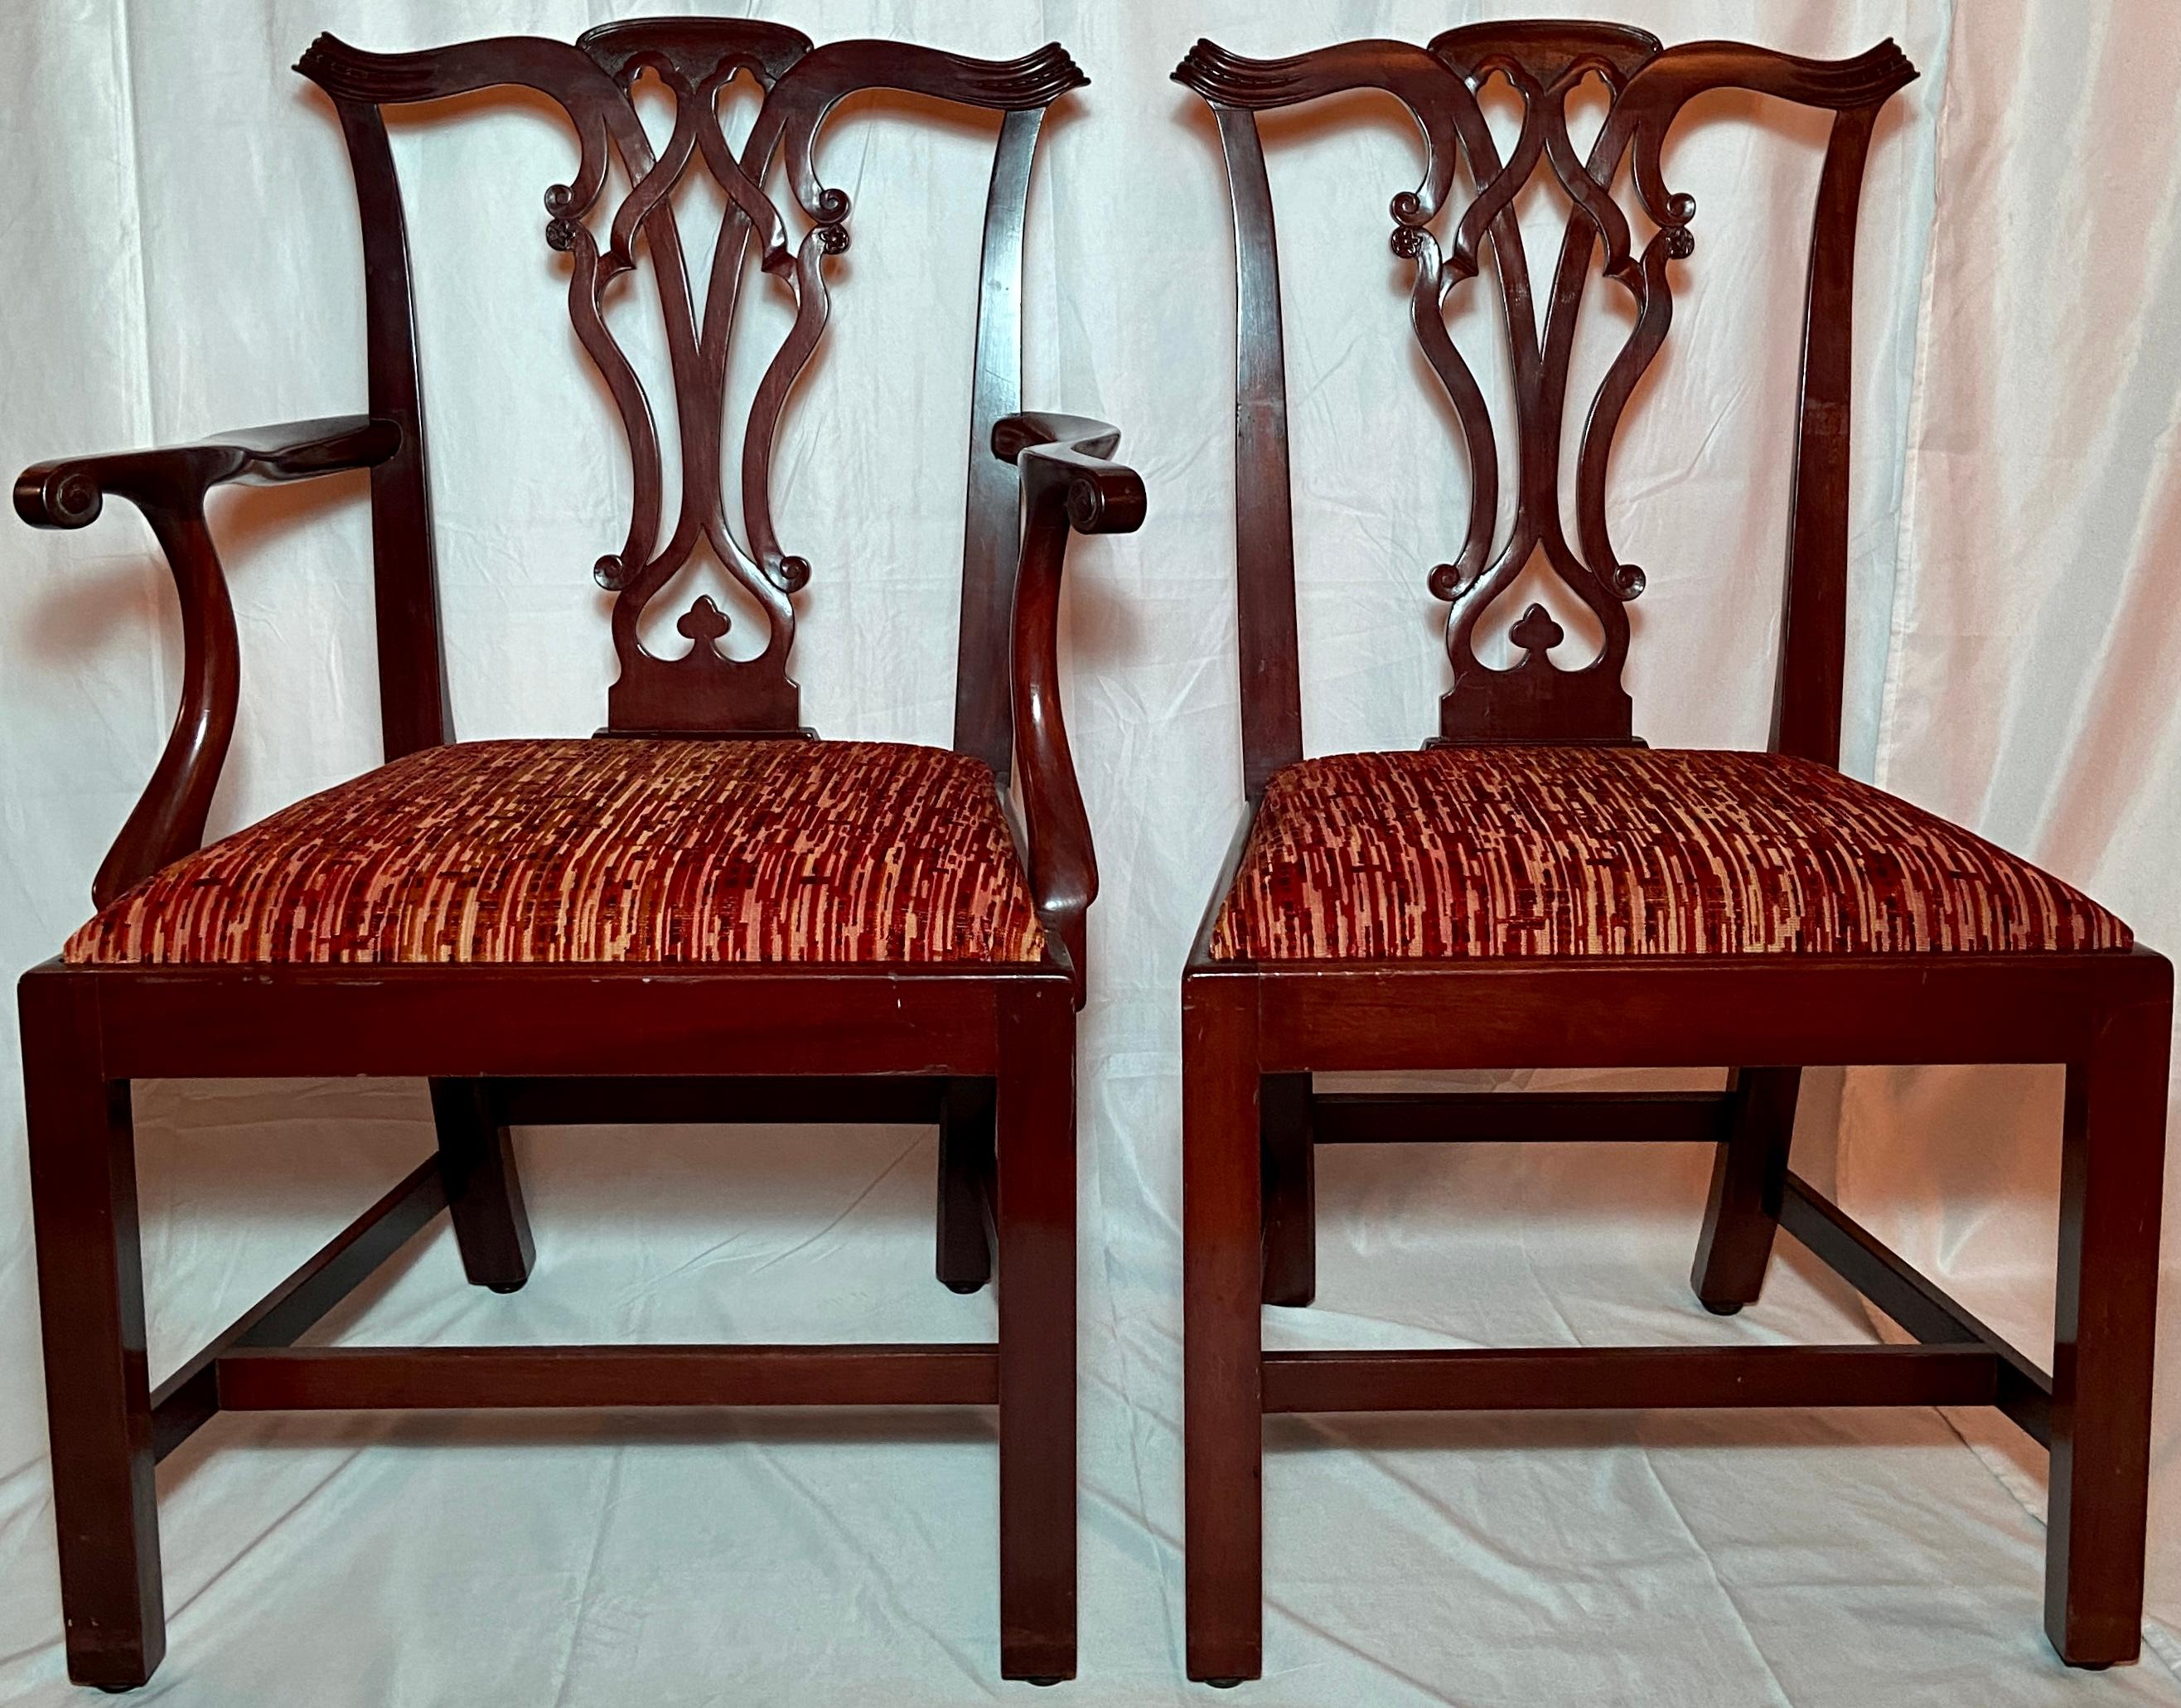 Set of 12 Antique English Mahogany Chippendale Chairs, Circa 1900.  
2 Armchairs and 10 Sidechairs, all newly upholstered.